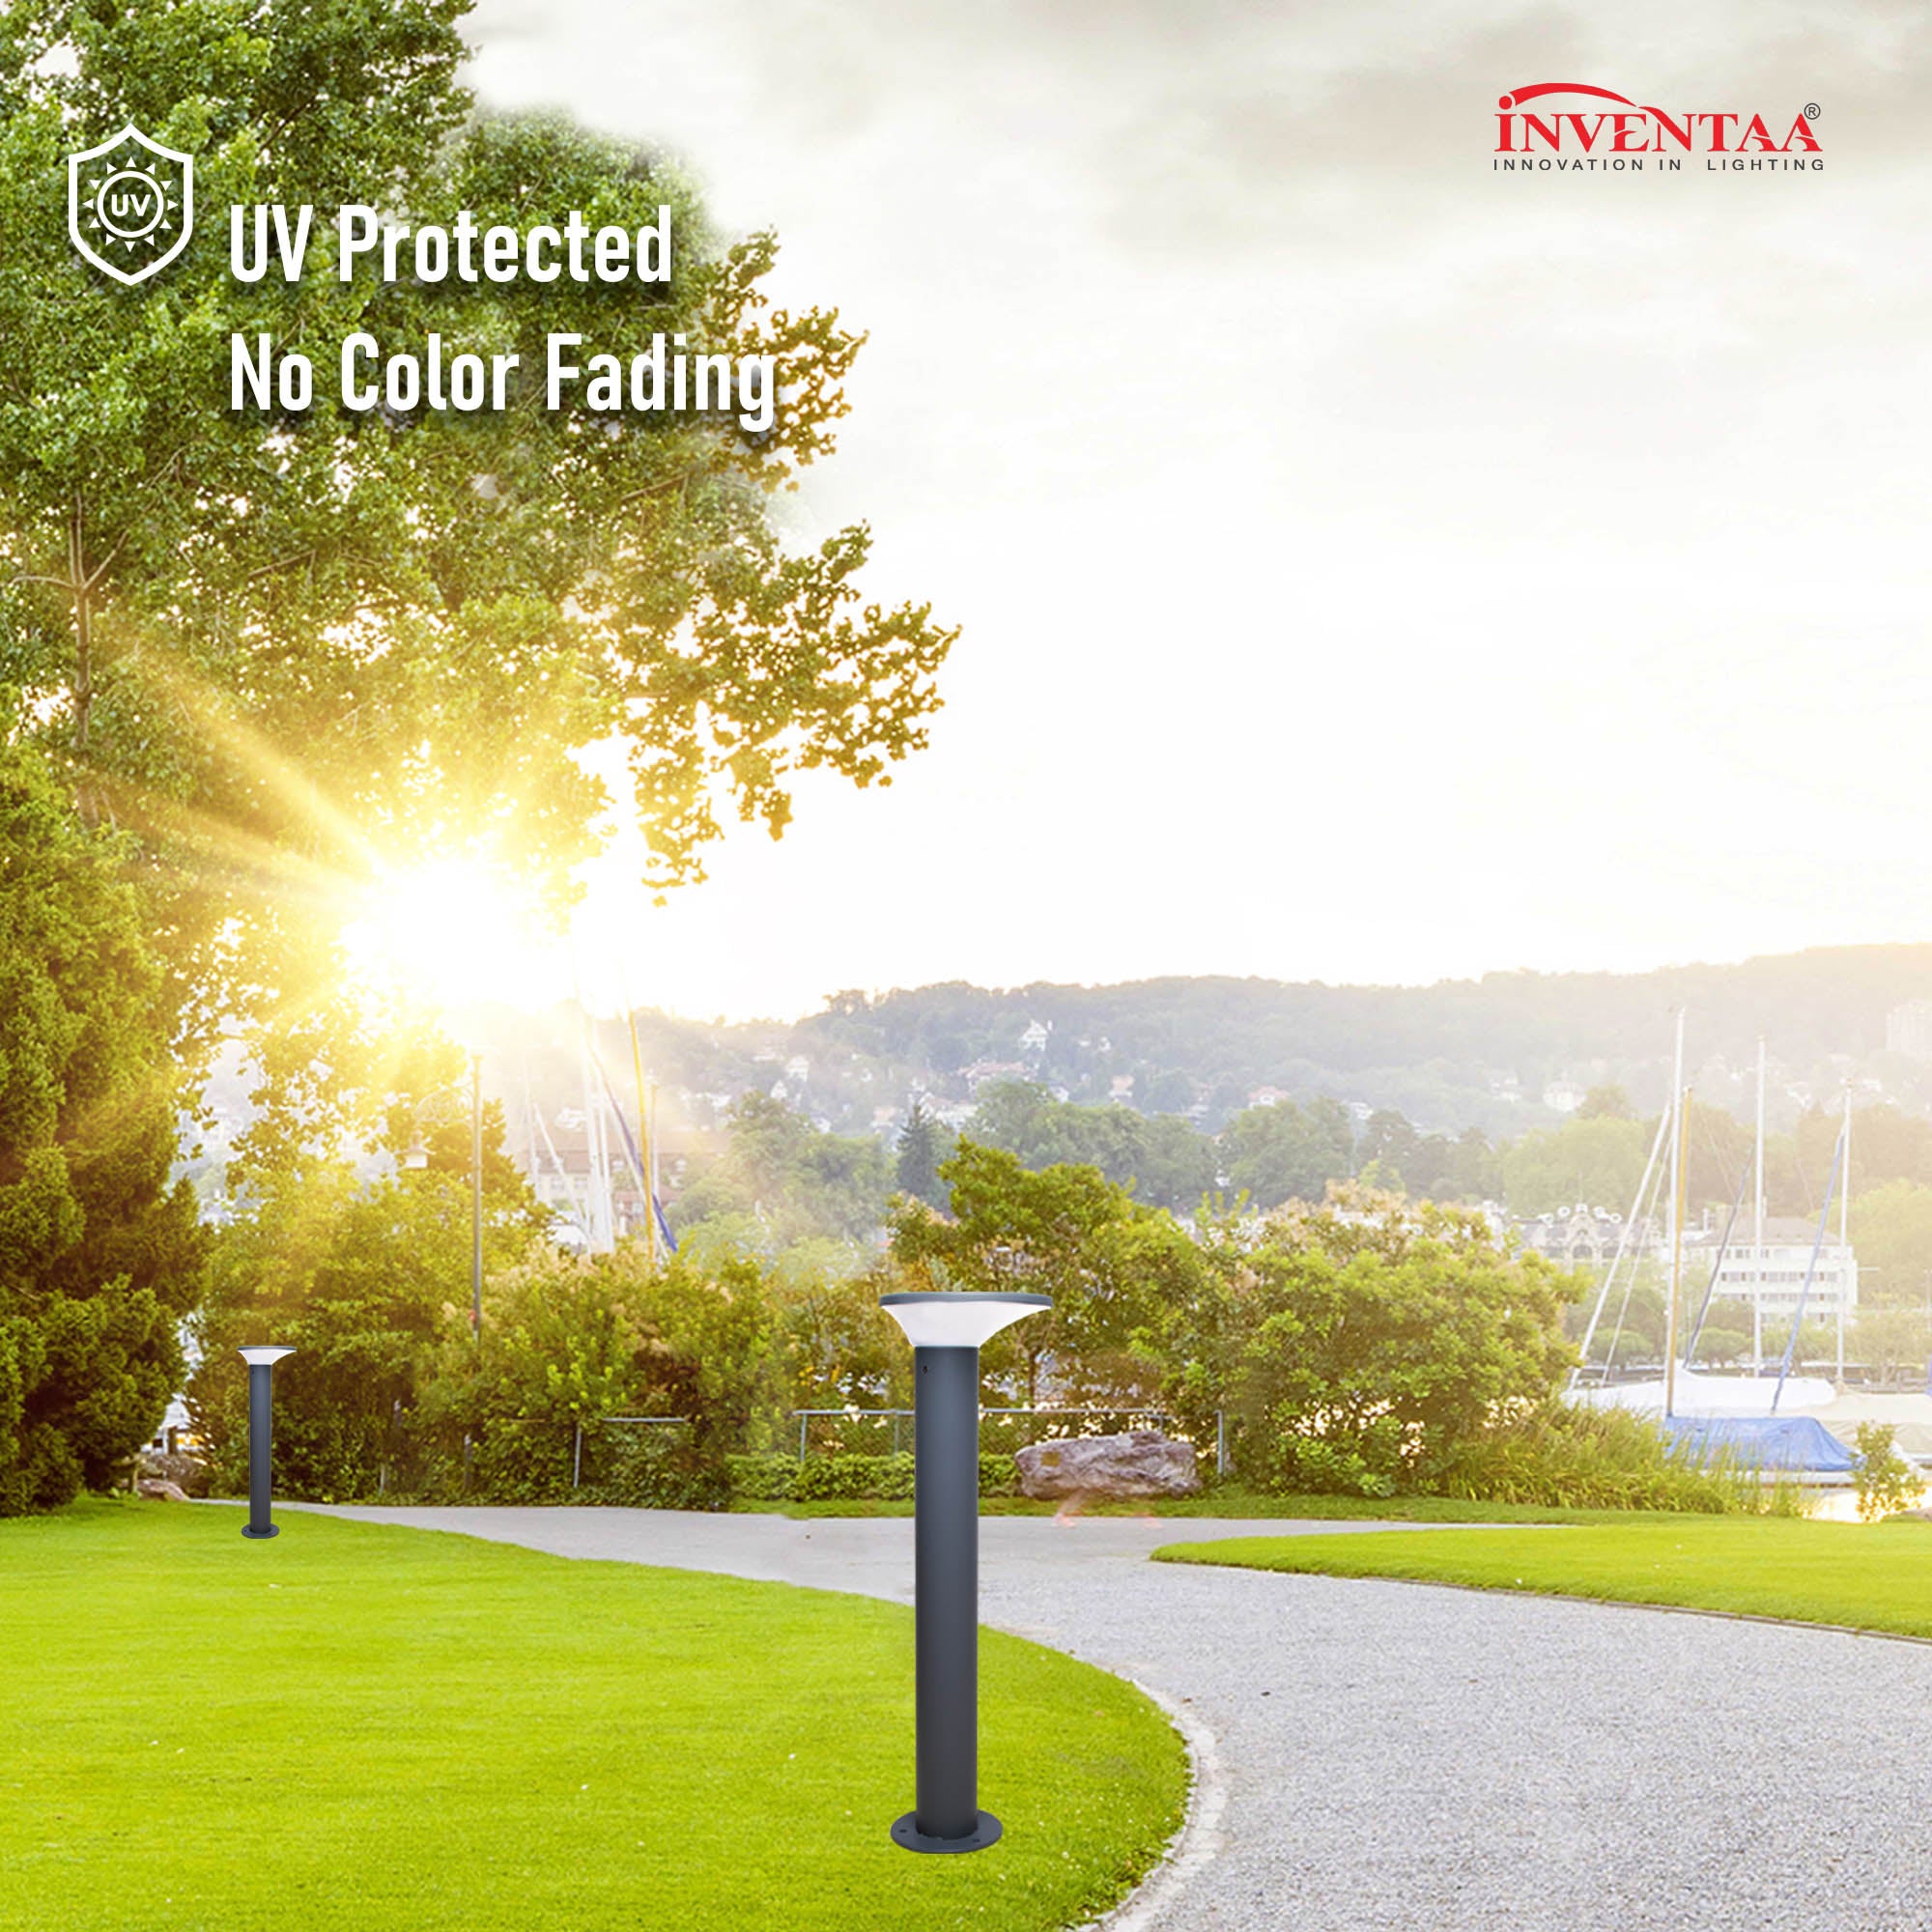 Romy 2 feet led garden bollard light featuring its UV protection and no color fading resistance for enduring performance #size_2 feet